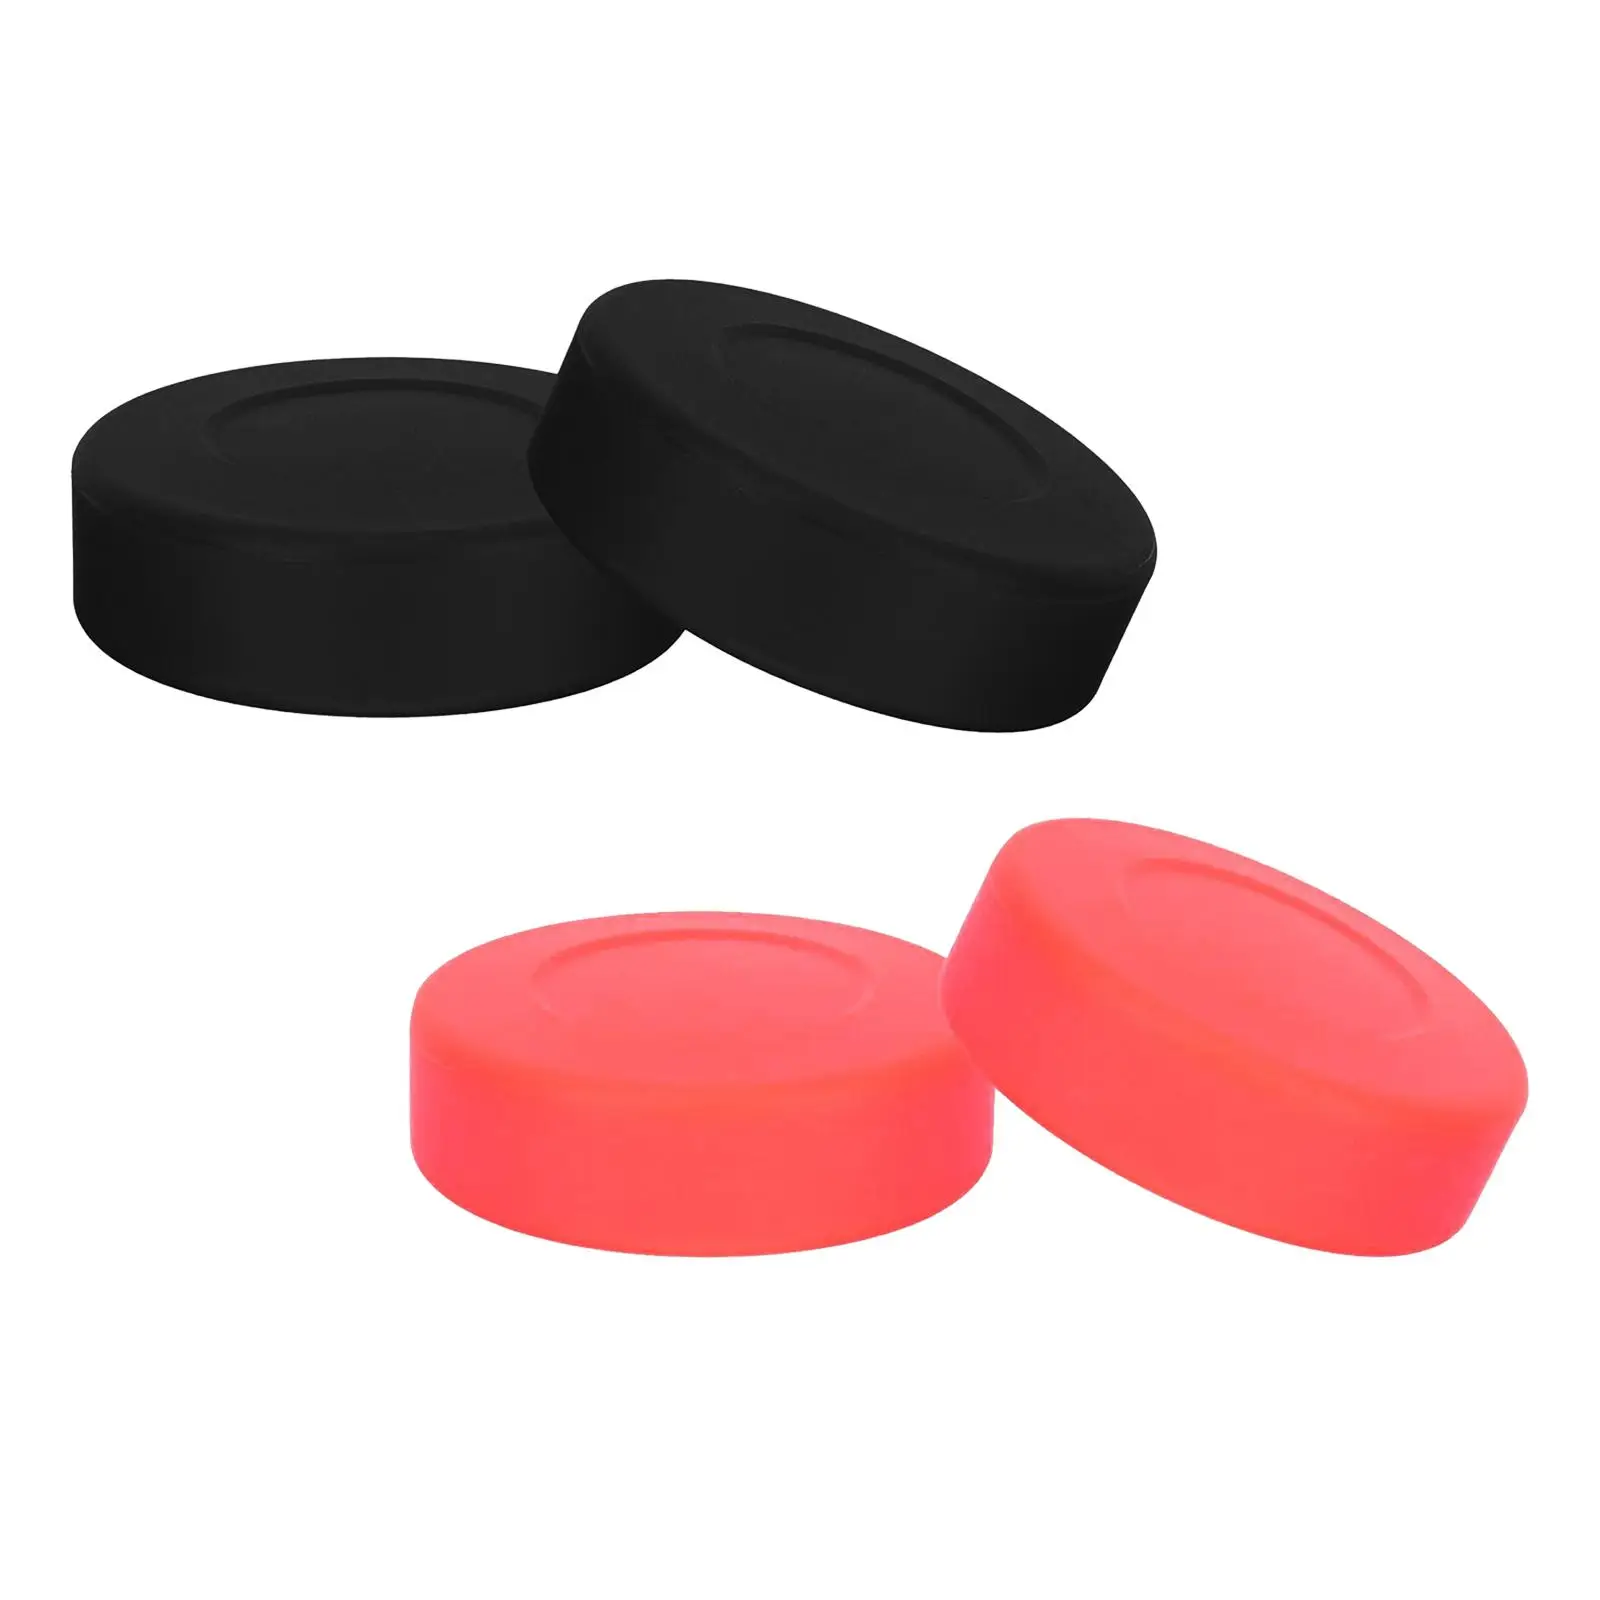 2 Pieces Ice Hockey Puck Simple to Use Hockey Ball for Adults Kids Athletes